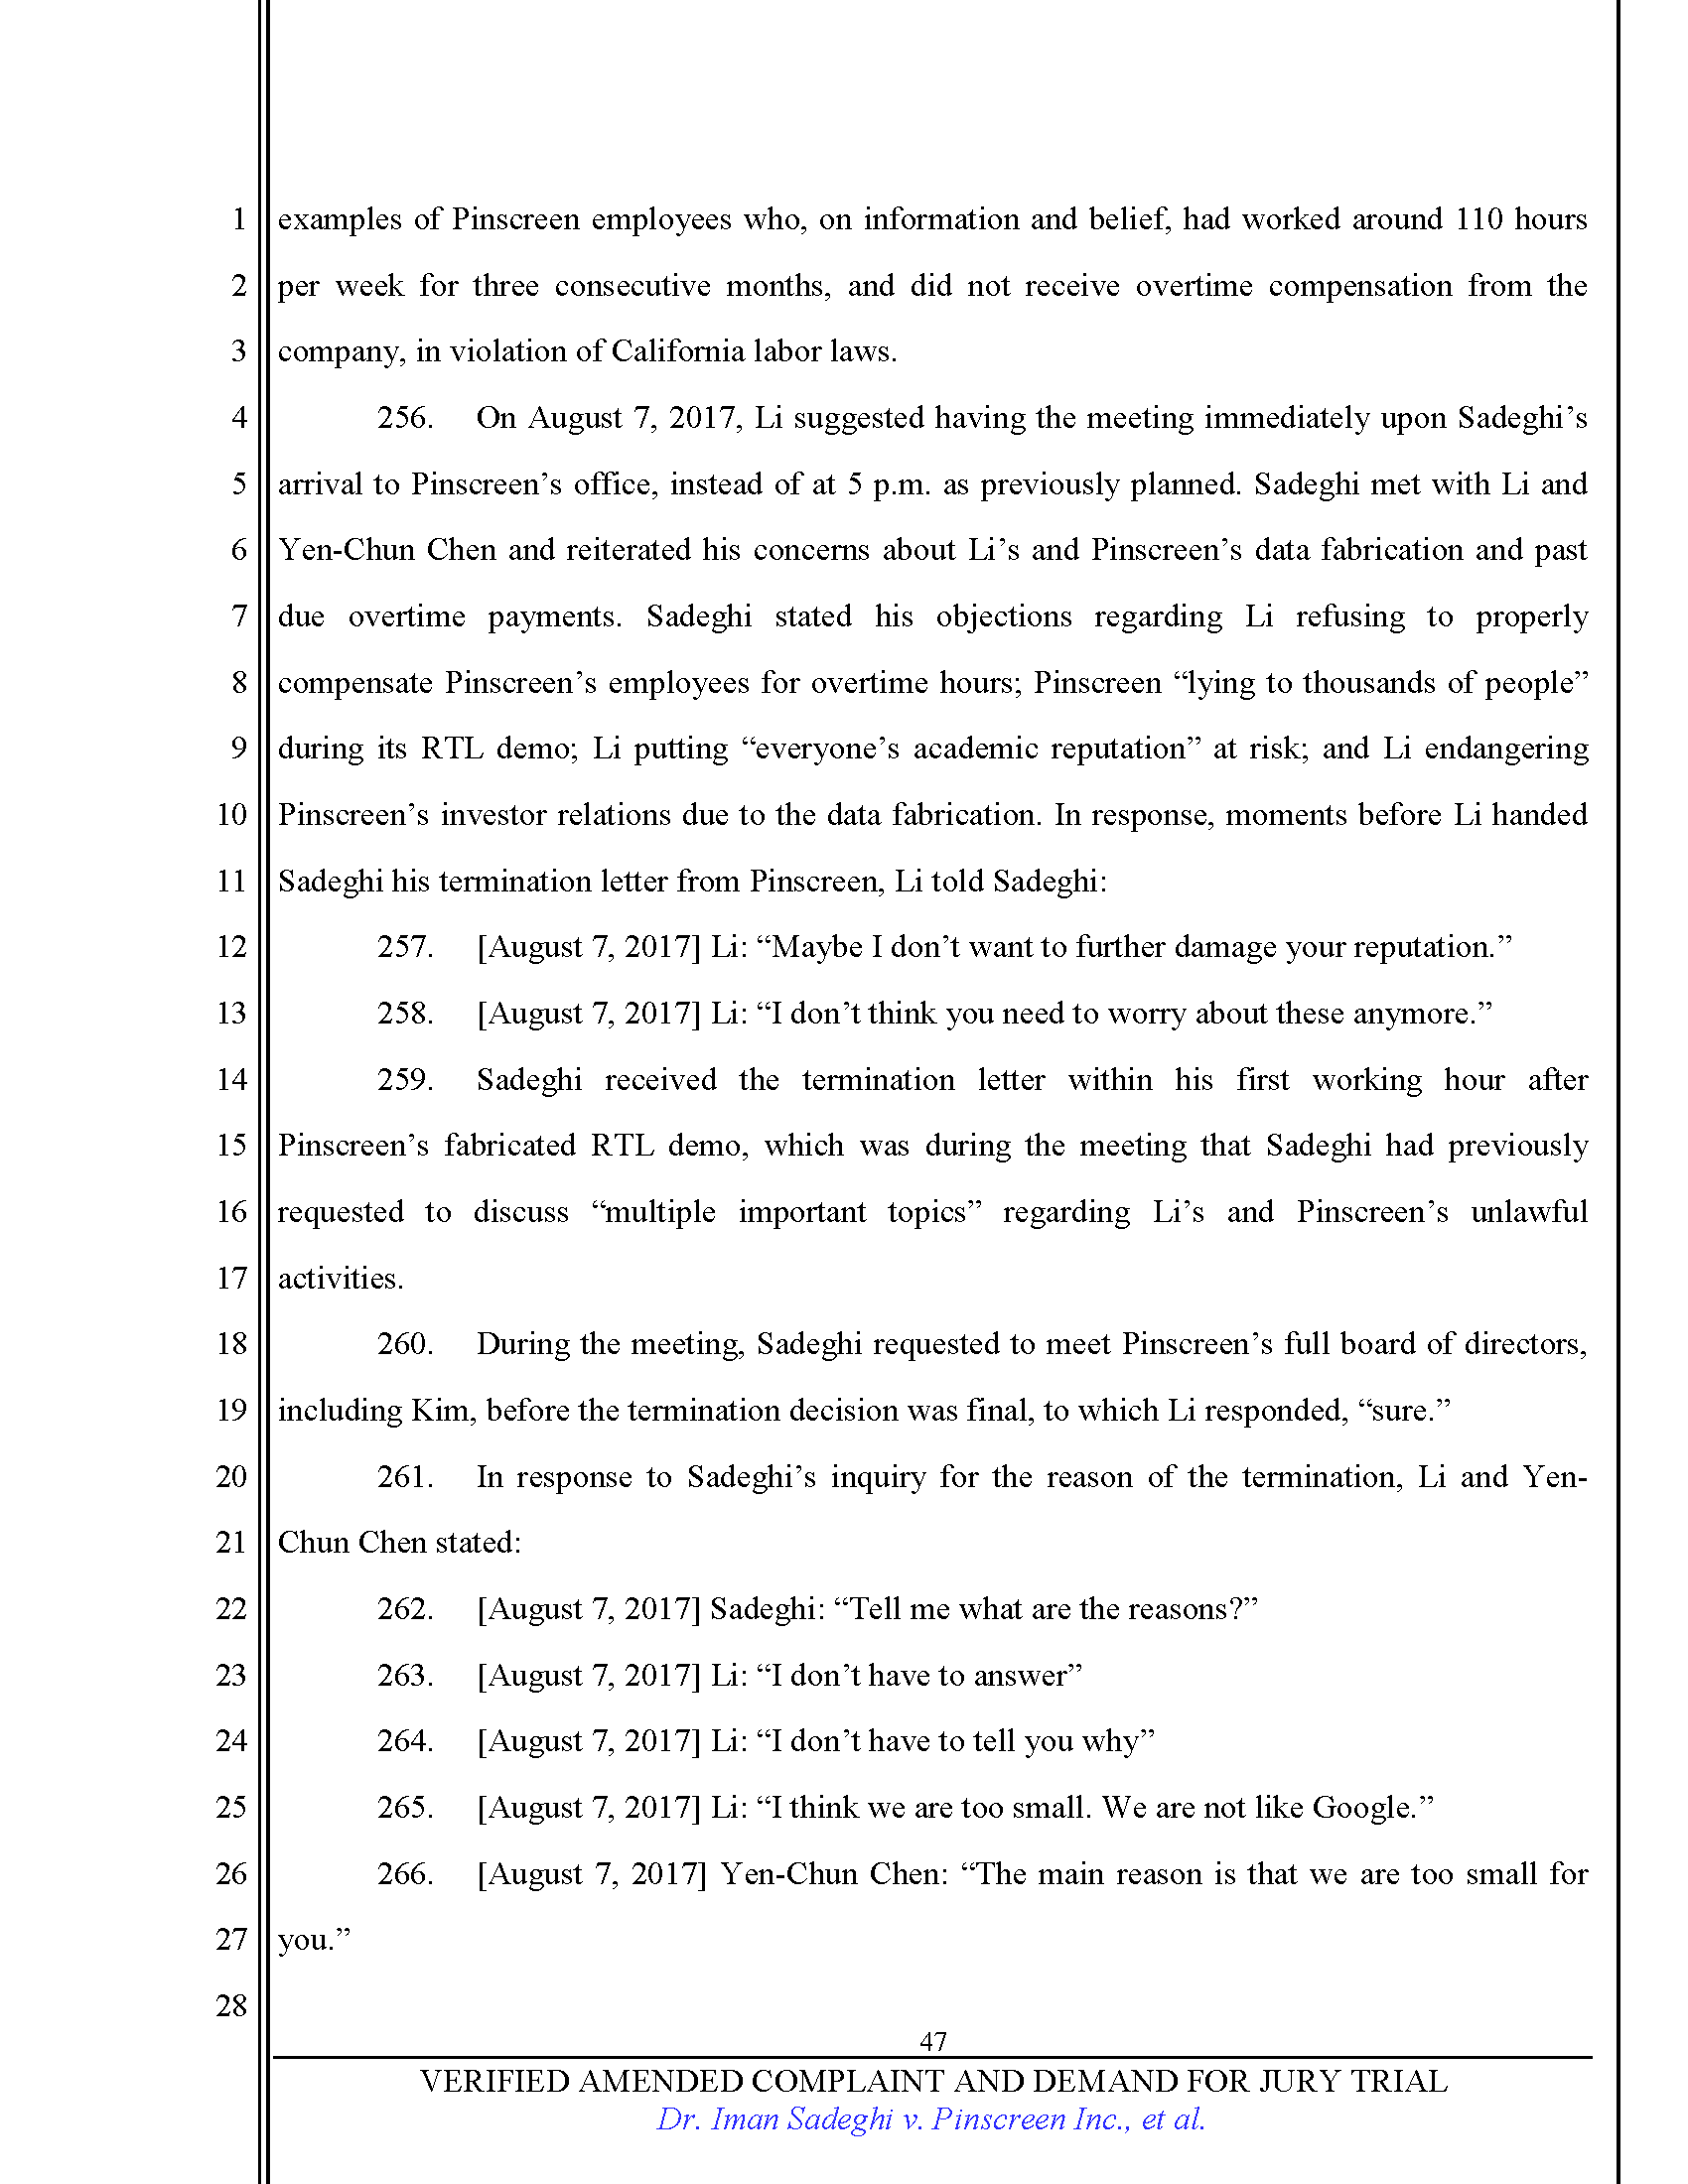 First Amended Complaint (FAC) Page 47